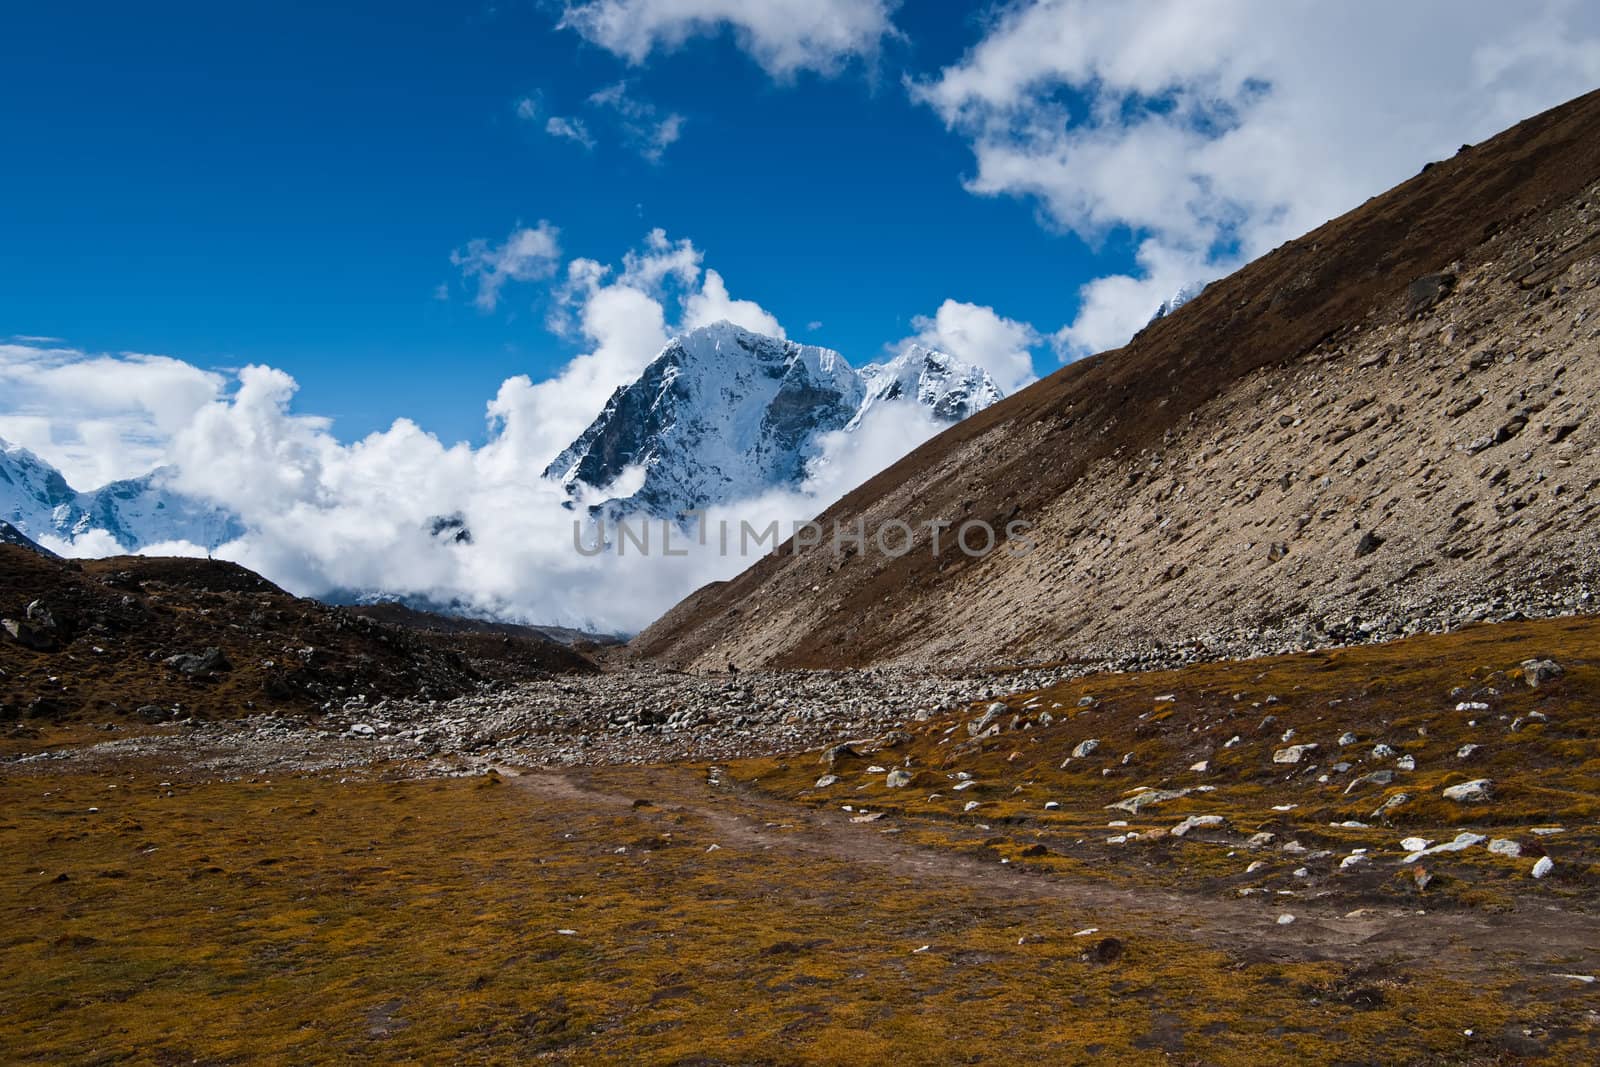 Himalayas landscape in autumn: hill and mountain peaks. Pictured in Nepal